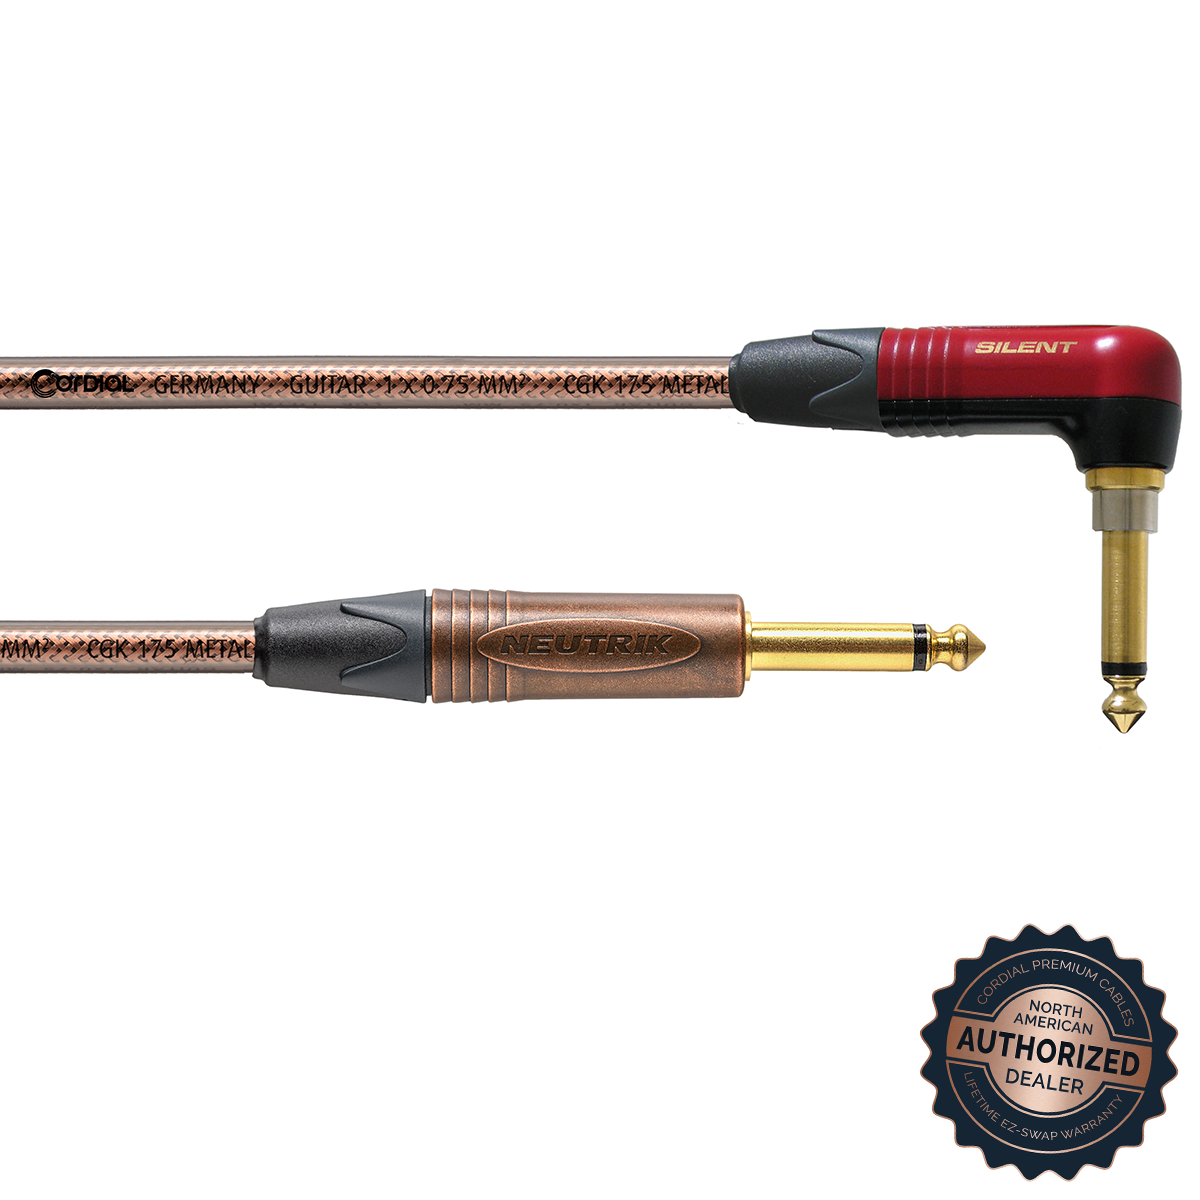 Cordial High-Copper Premium Instrument Cable; Translucent, SilentPlug, 30ft.

SKU: CSI 9 RP - METAL - SILENT

1/4" TS Male to 1/4" TS Male Right-Angle SilentPlug; Translucent, 30ft. 